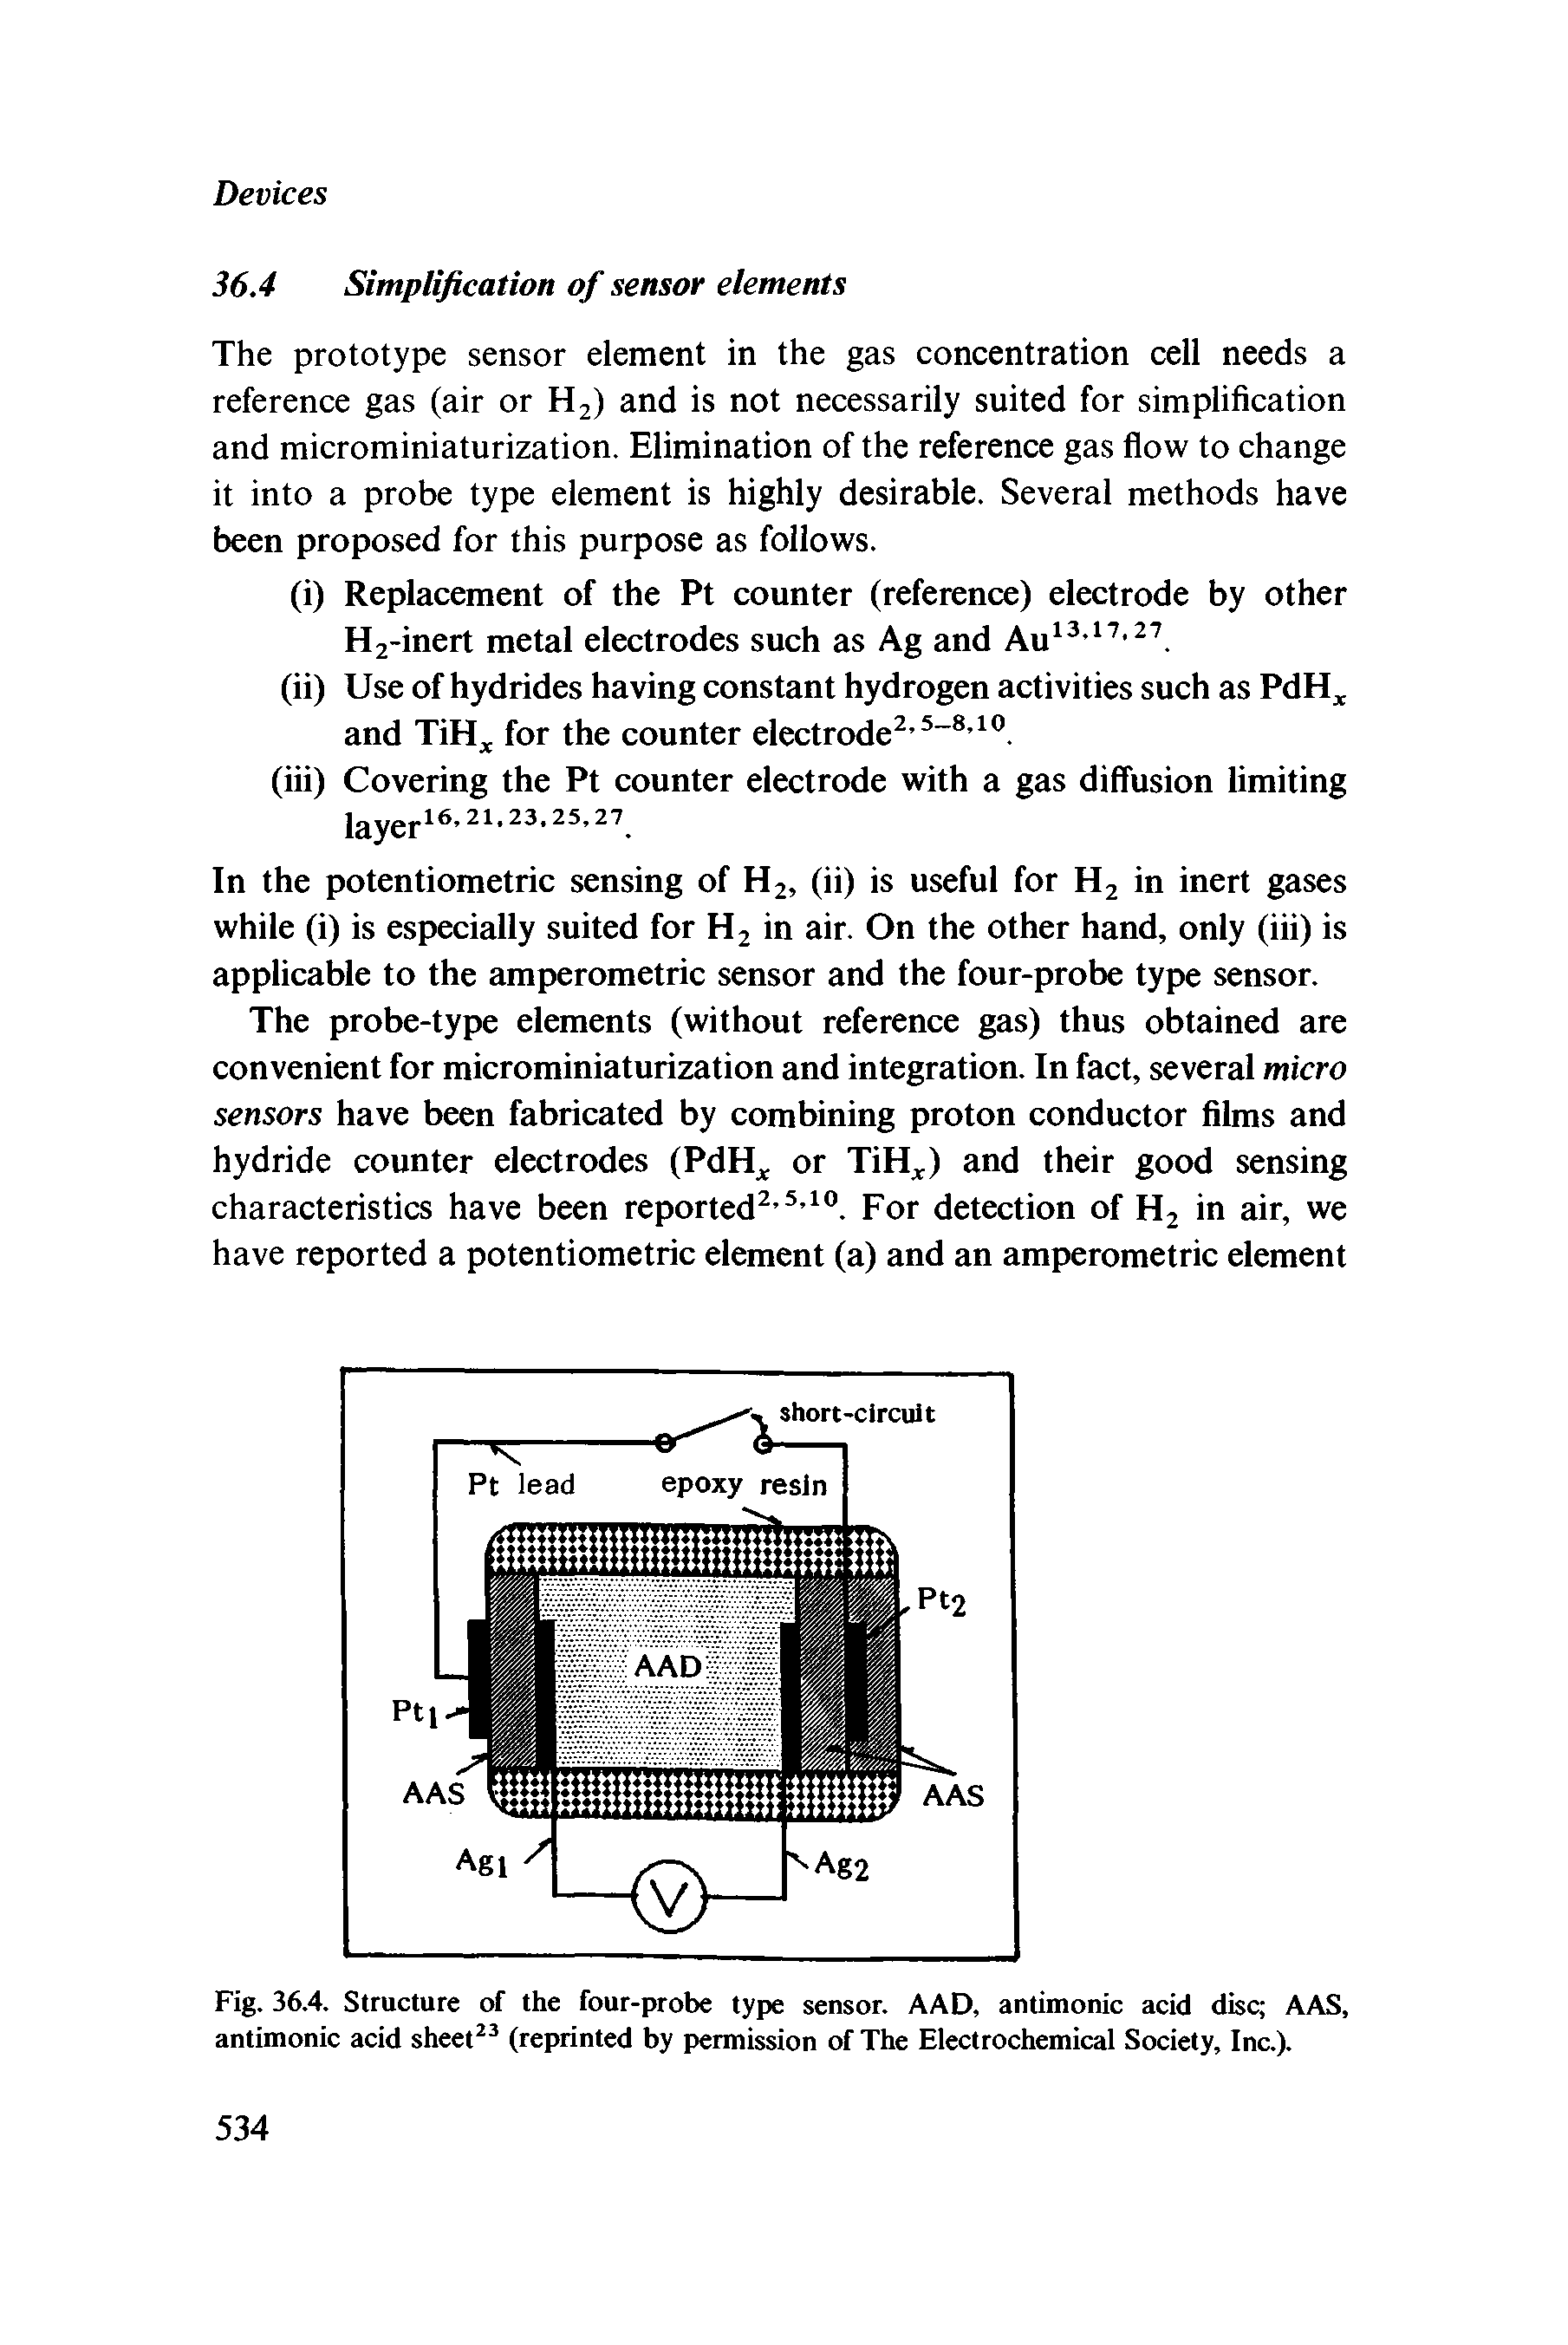 Fig. 36.4. Structure of the four-probe type sensor. AAD, antimonic acid disc AAS, antimonic acid sheet (reprinted by permission of The Electrochemical Society, Inc.).